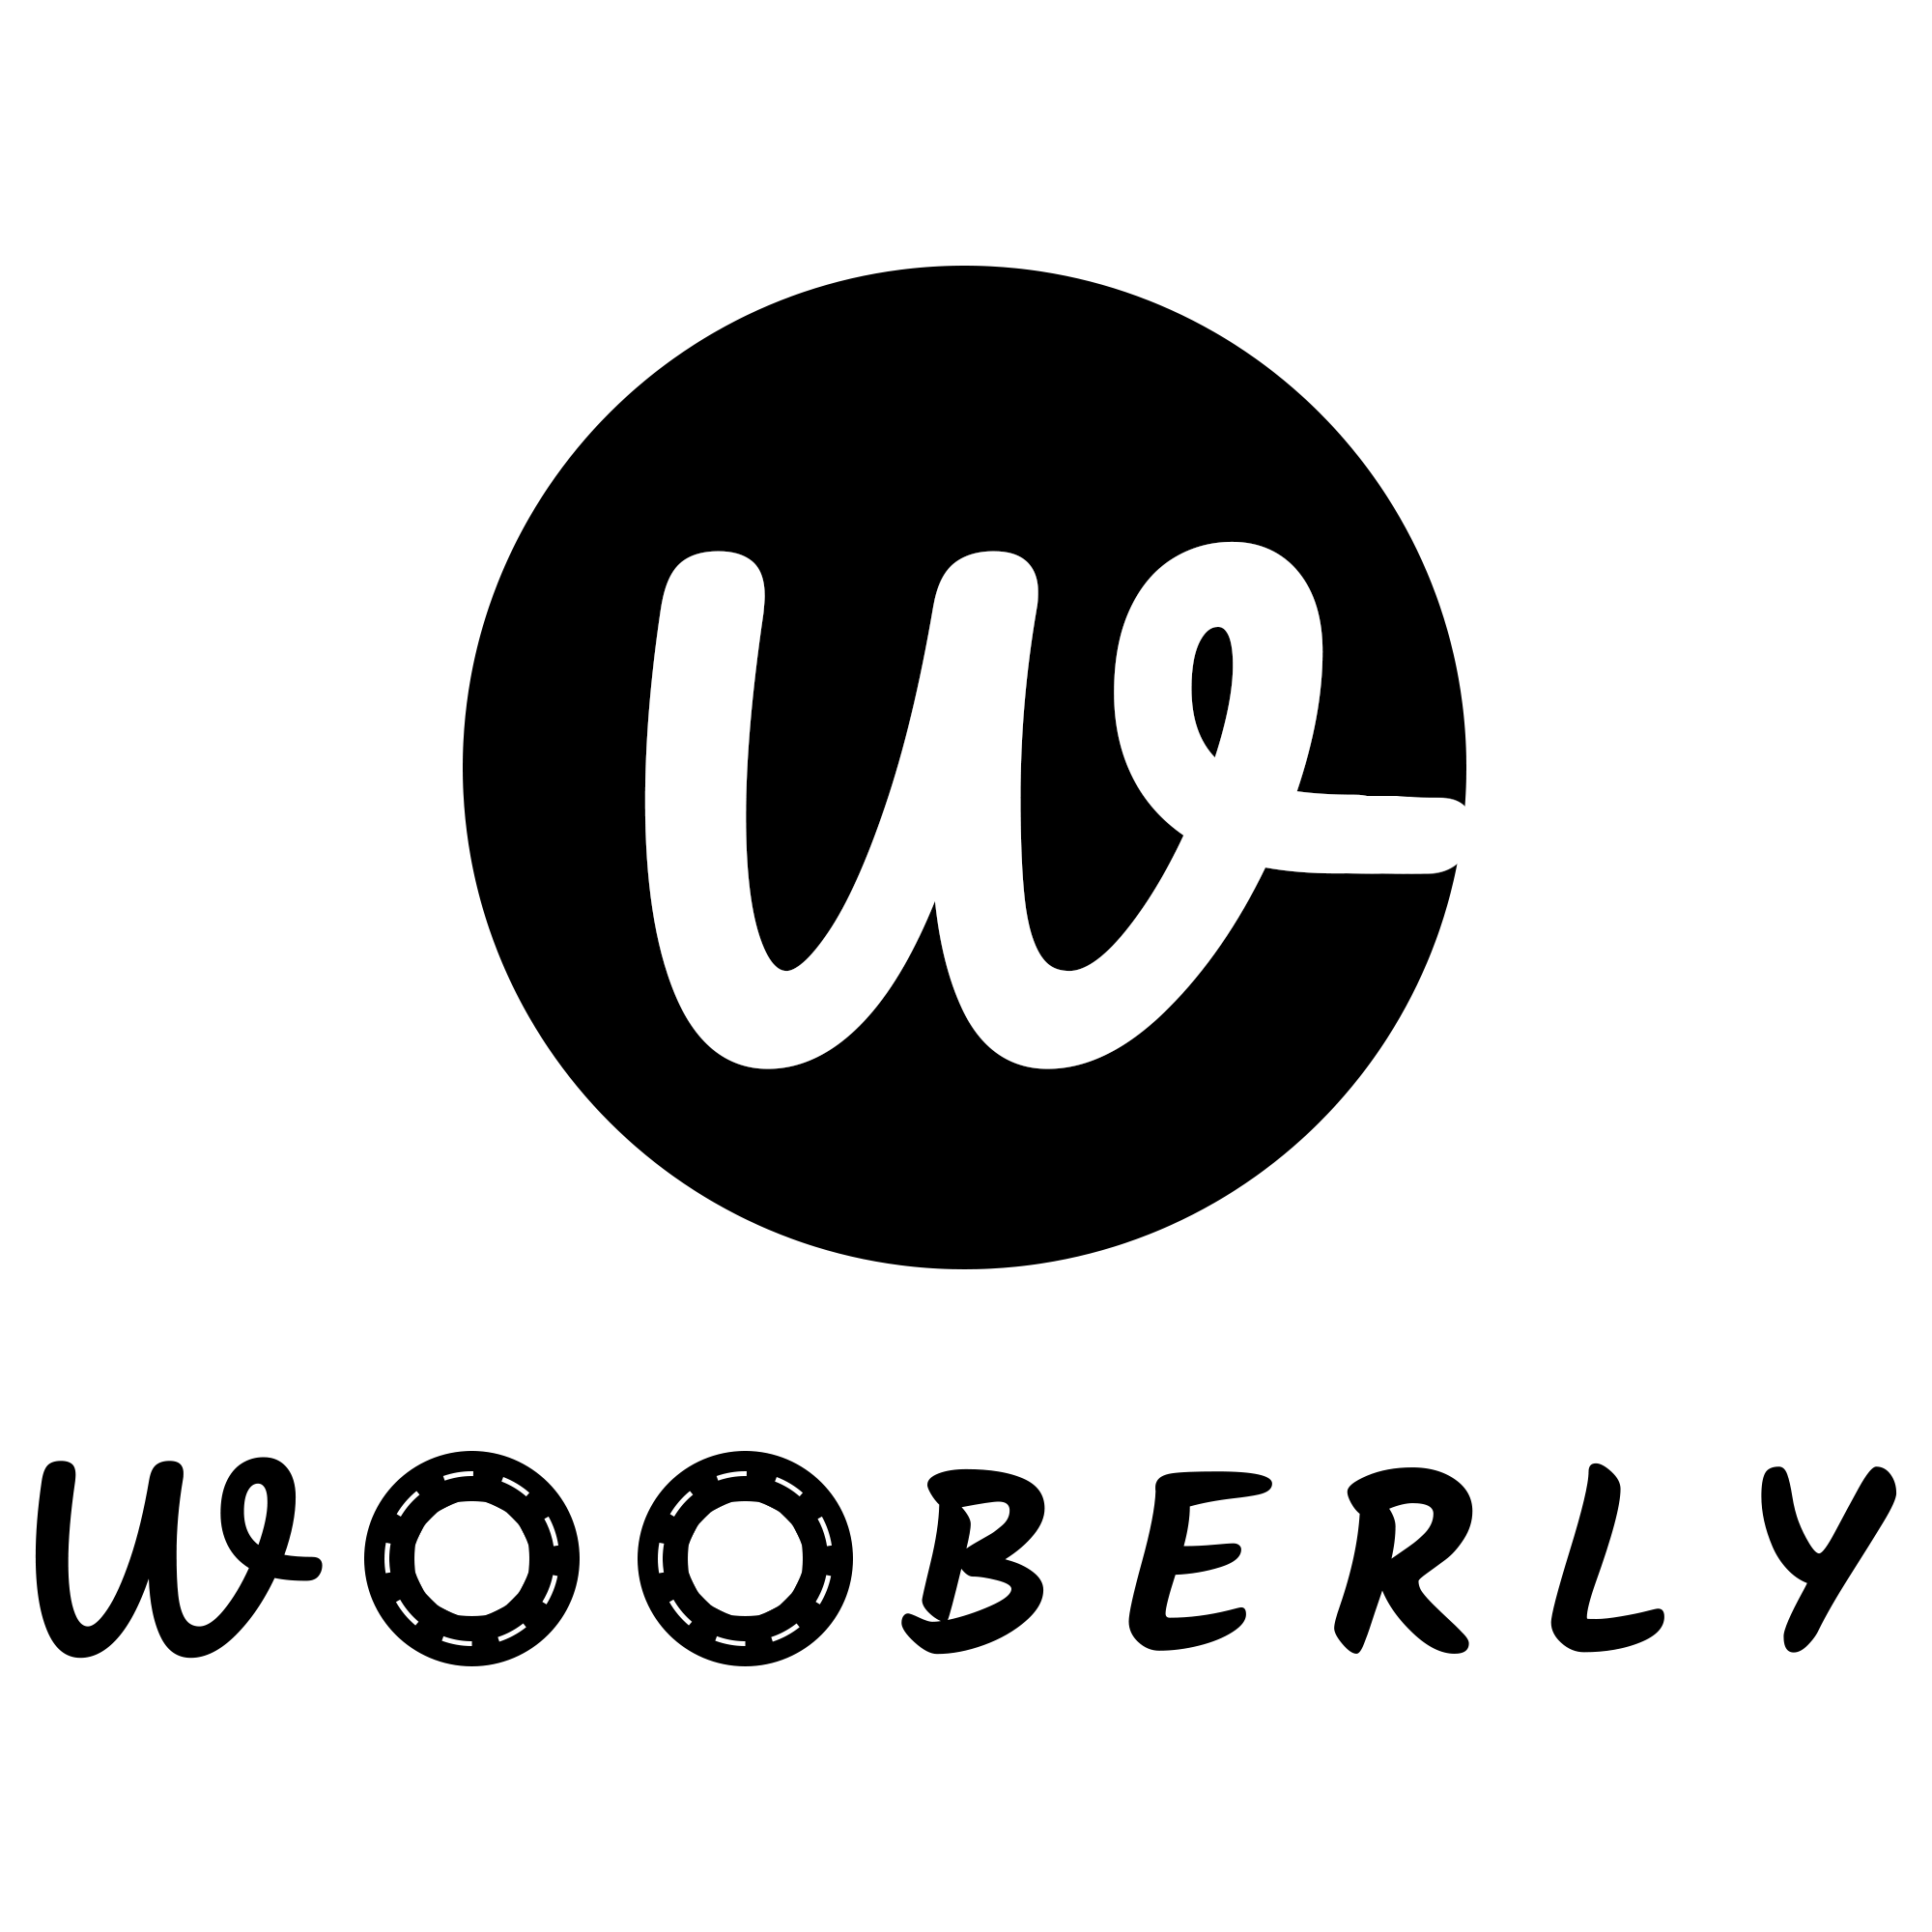 Wooberly - Uber clone app|Accounting Services|Professional Services